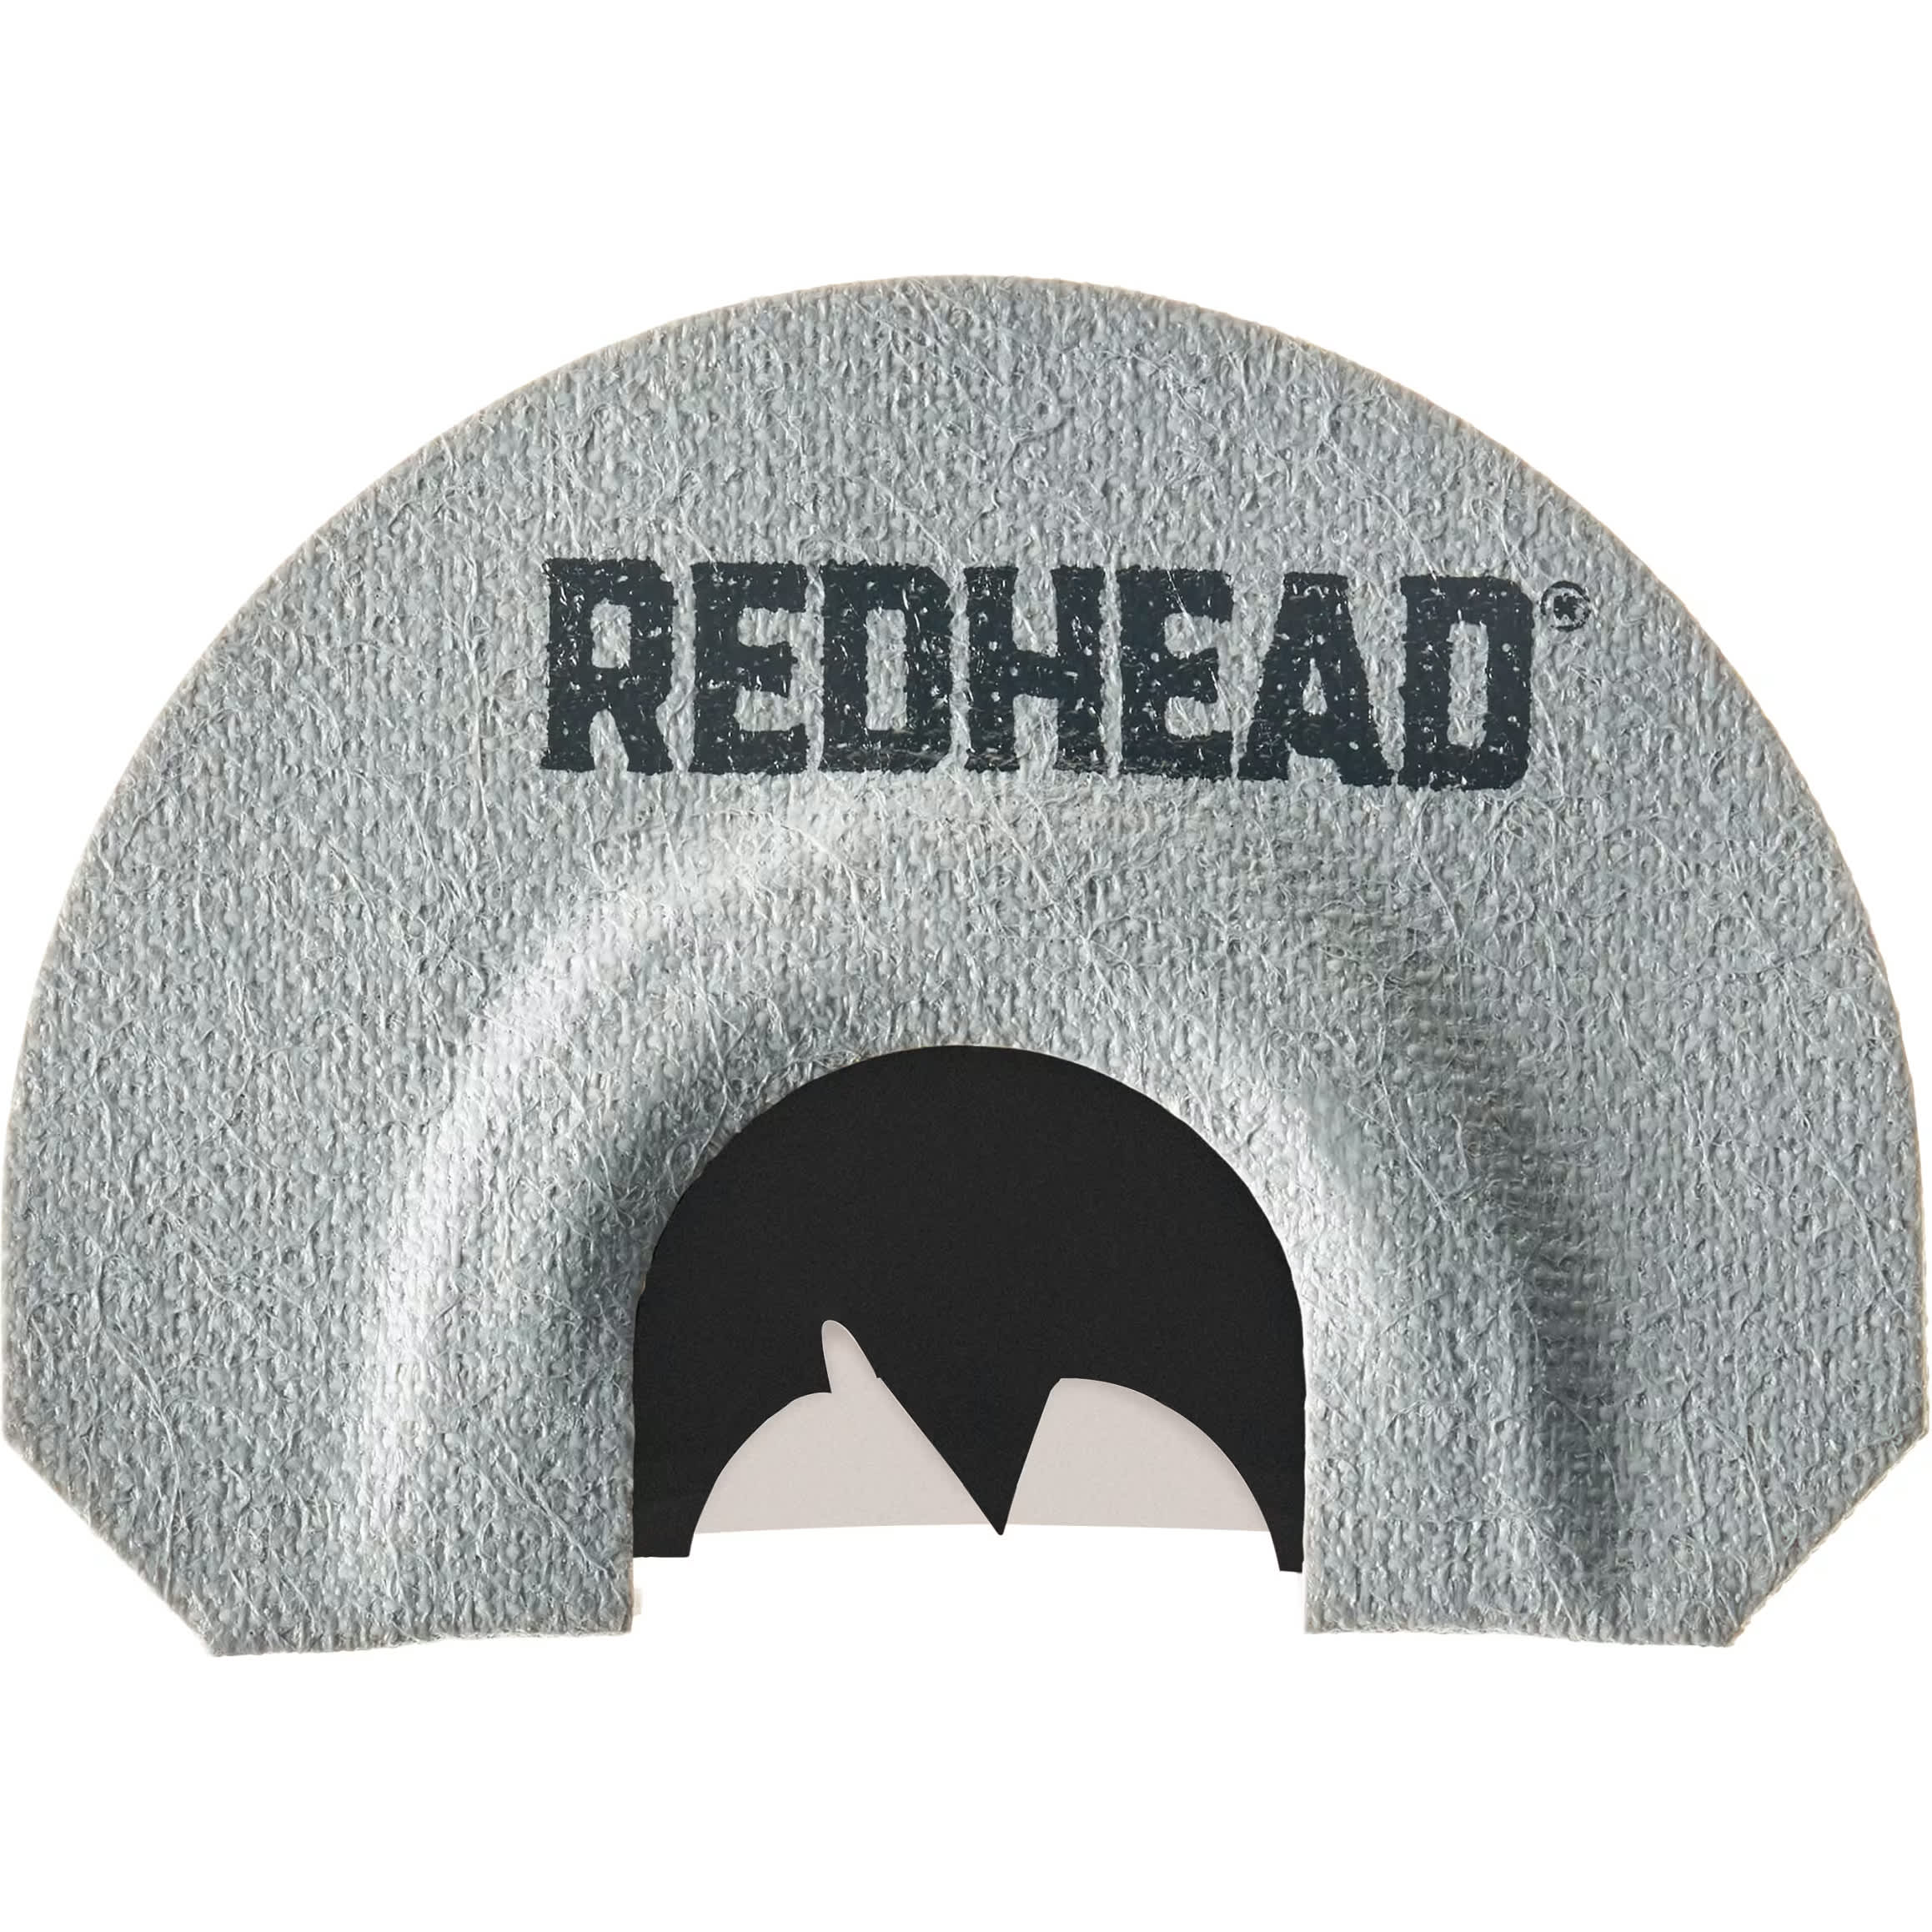 RedHead® Modified Batwing Mouth Turkey Call